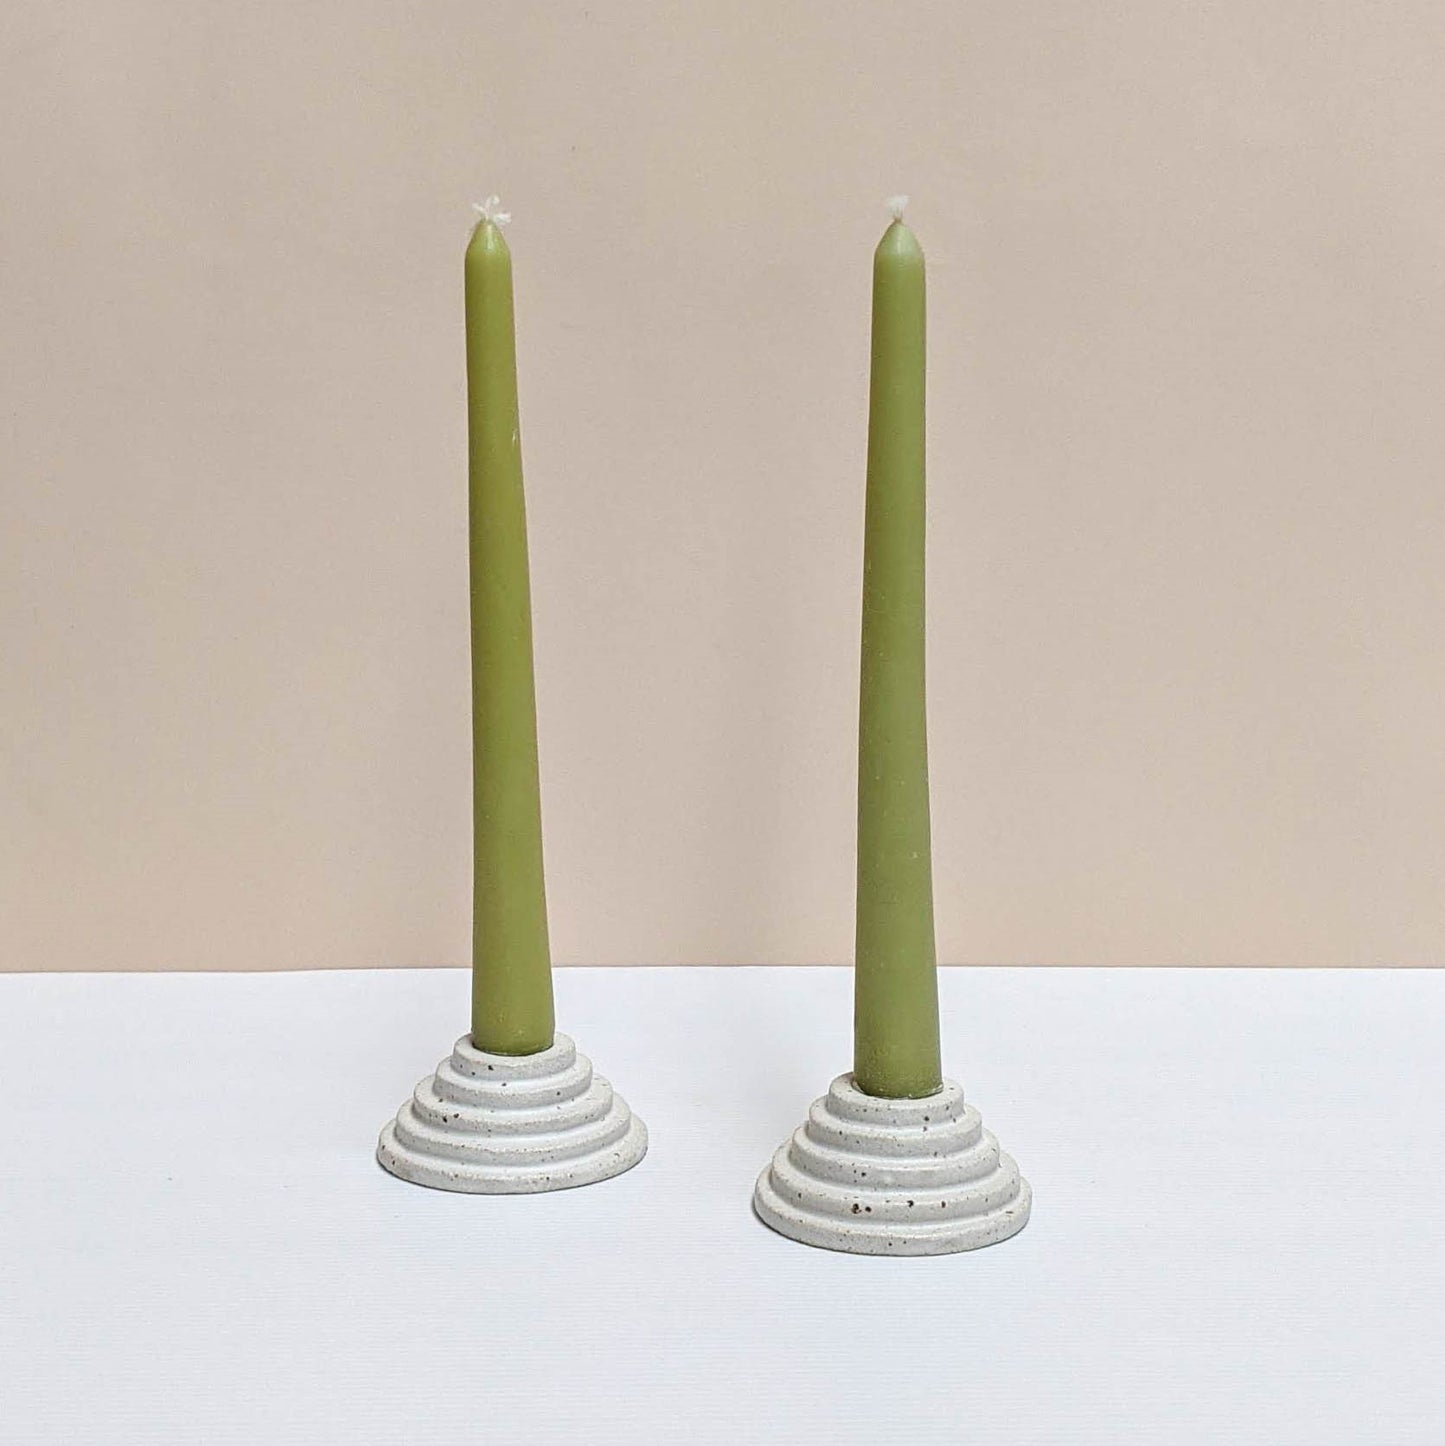 Two circular ceramic candle holders in speckled cream glaze.  Each candle features steps leading up to the candle. Both of the candle holders have green unlit candles and are sitting on a white and cream backdrop. 